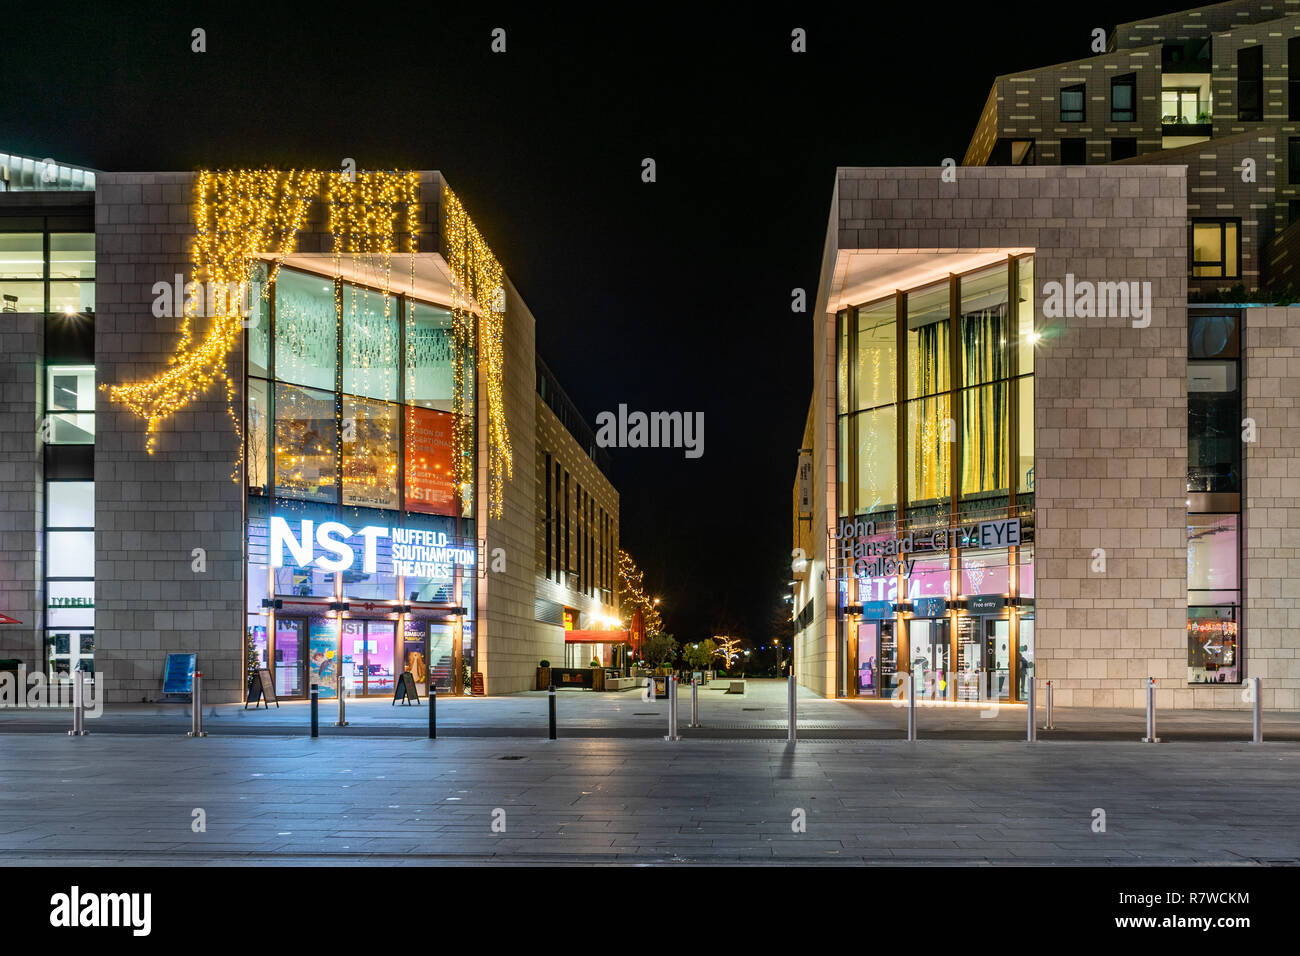 The cultural quarter at night in Guildhall Square with the John Hansard Gallery and the Nuffield Theatre (NST) in Southampton 2018, UK Stock Photo